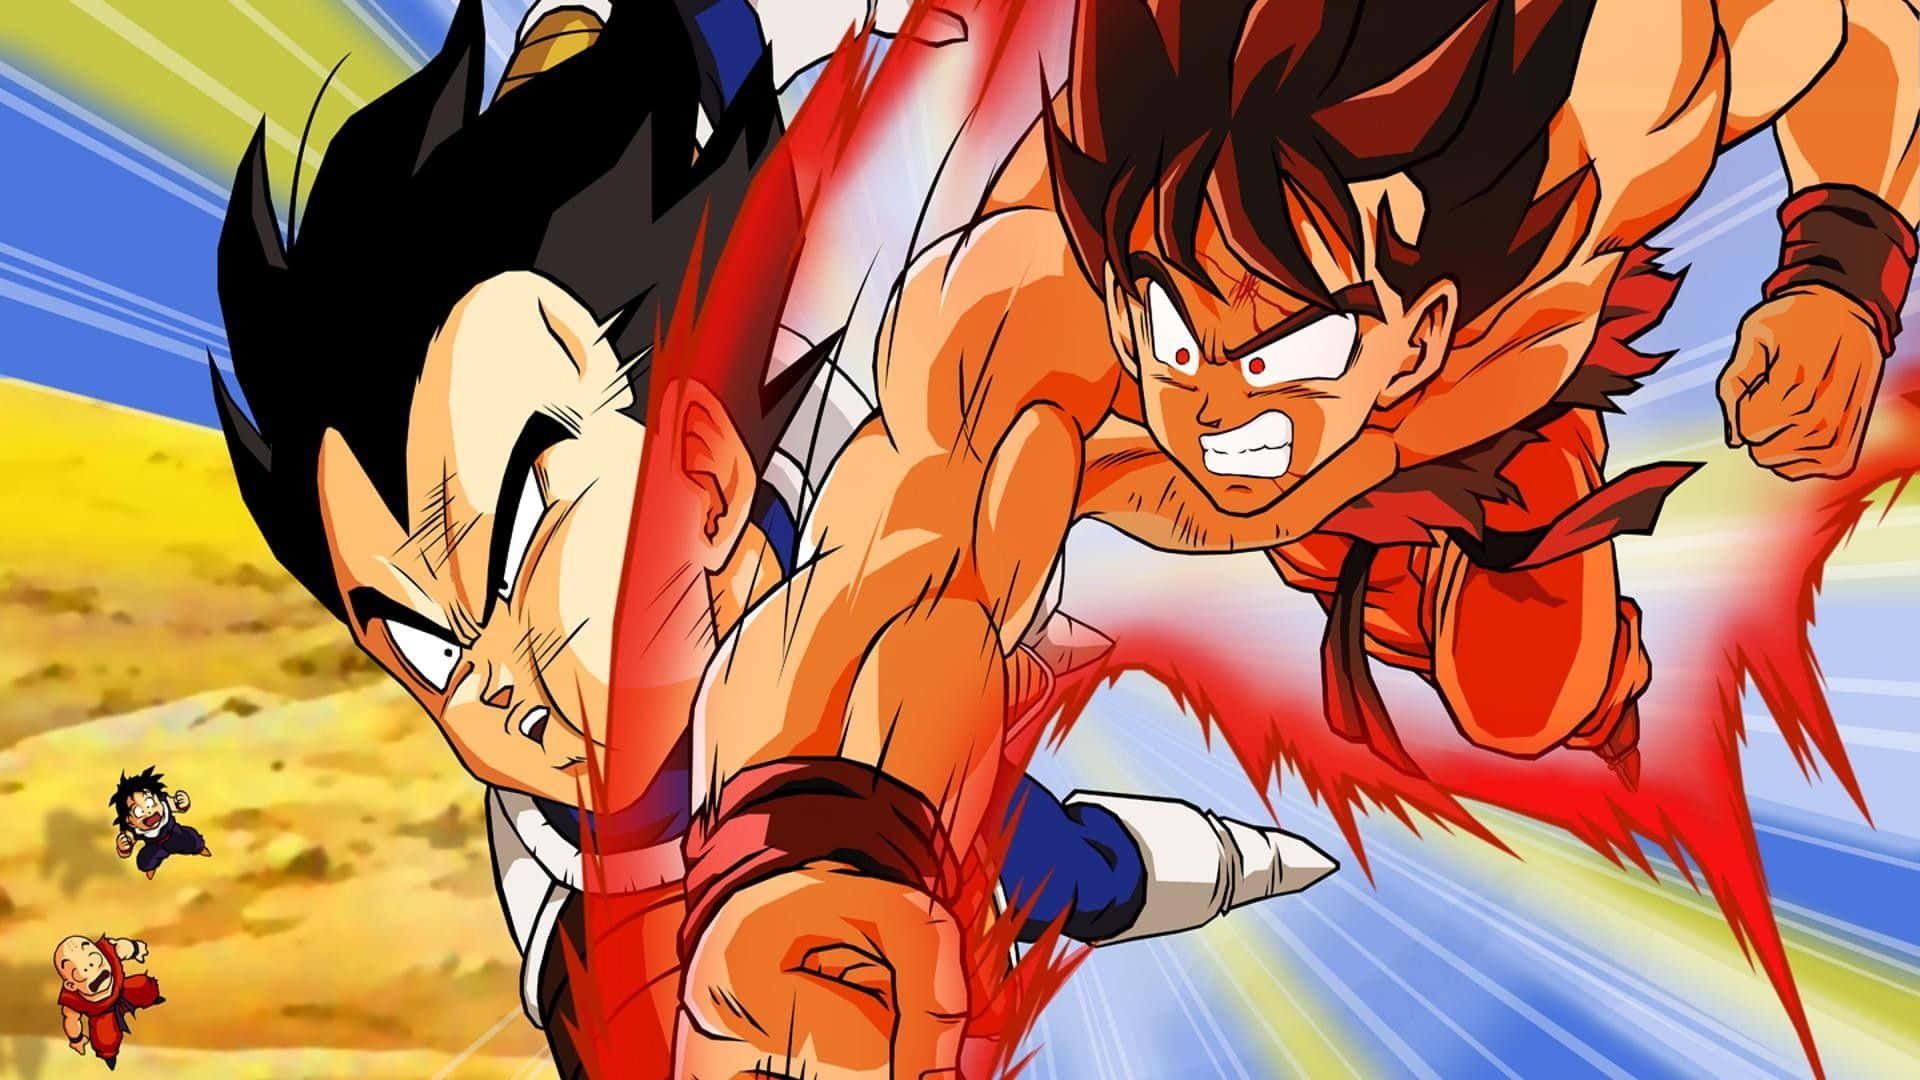 Download Vegeta And Goku Fighting Together Picture | Wallpapers.com